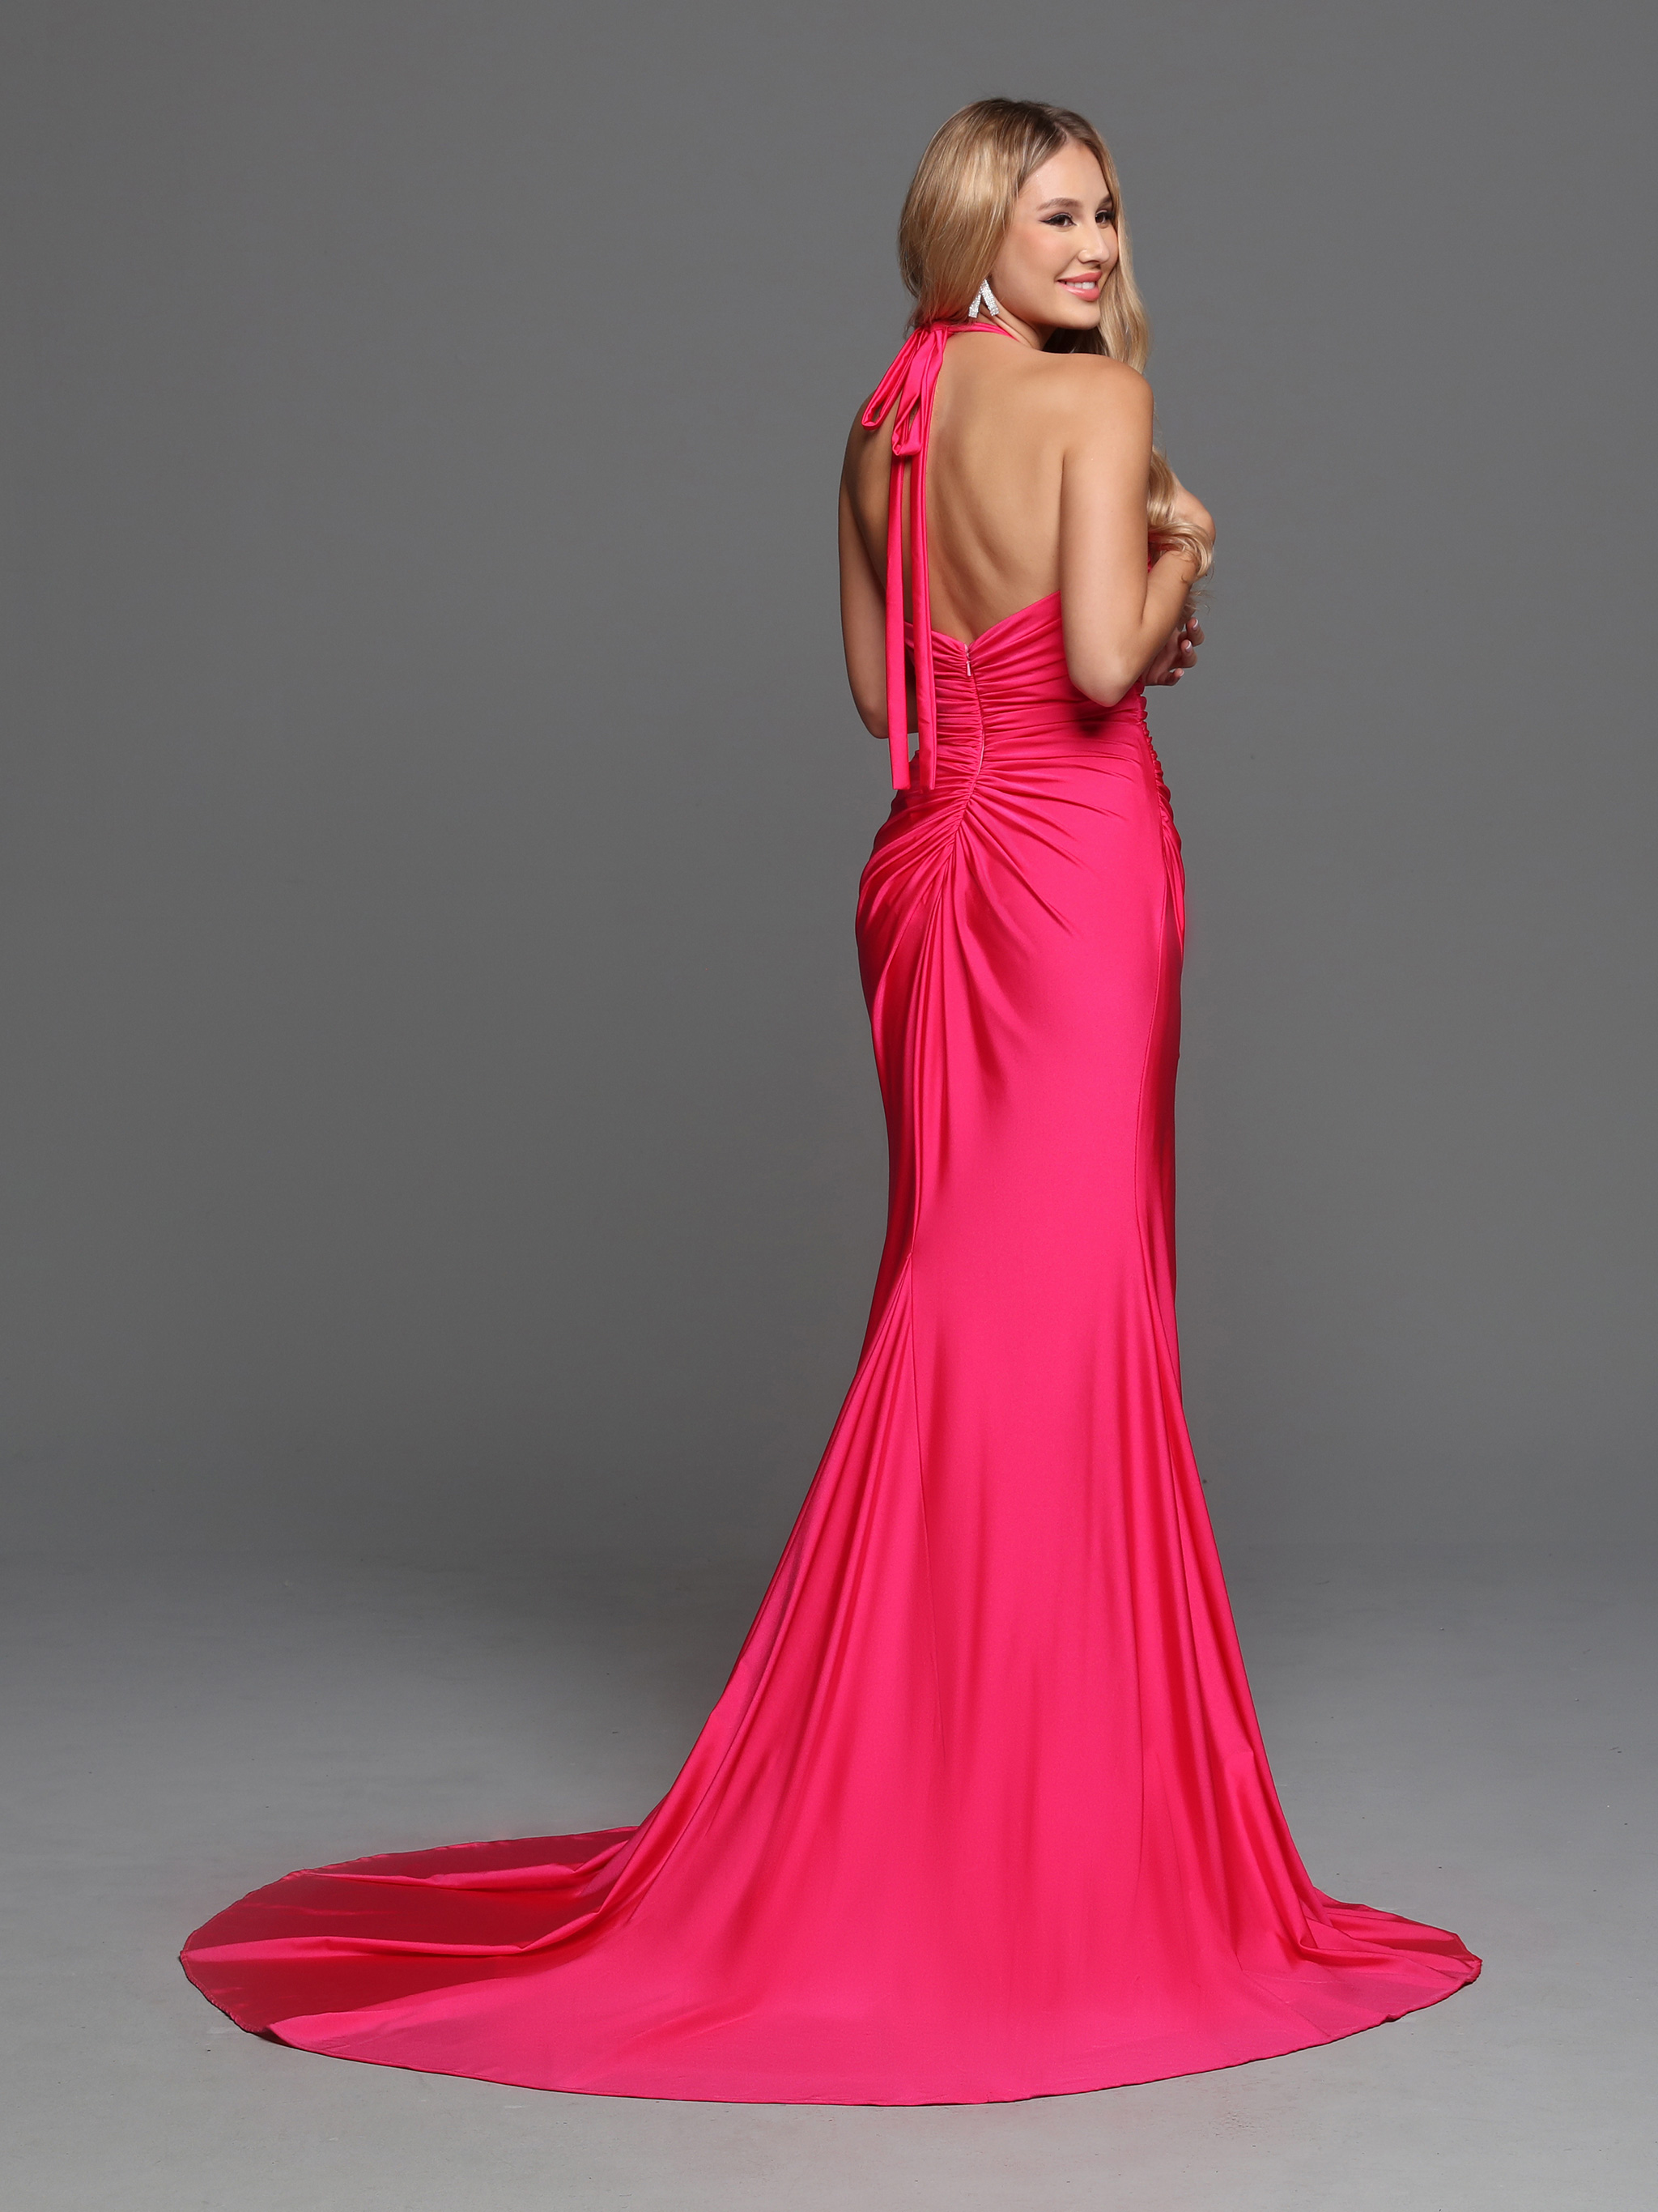 Image showing back view of style #72277